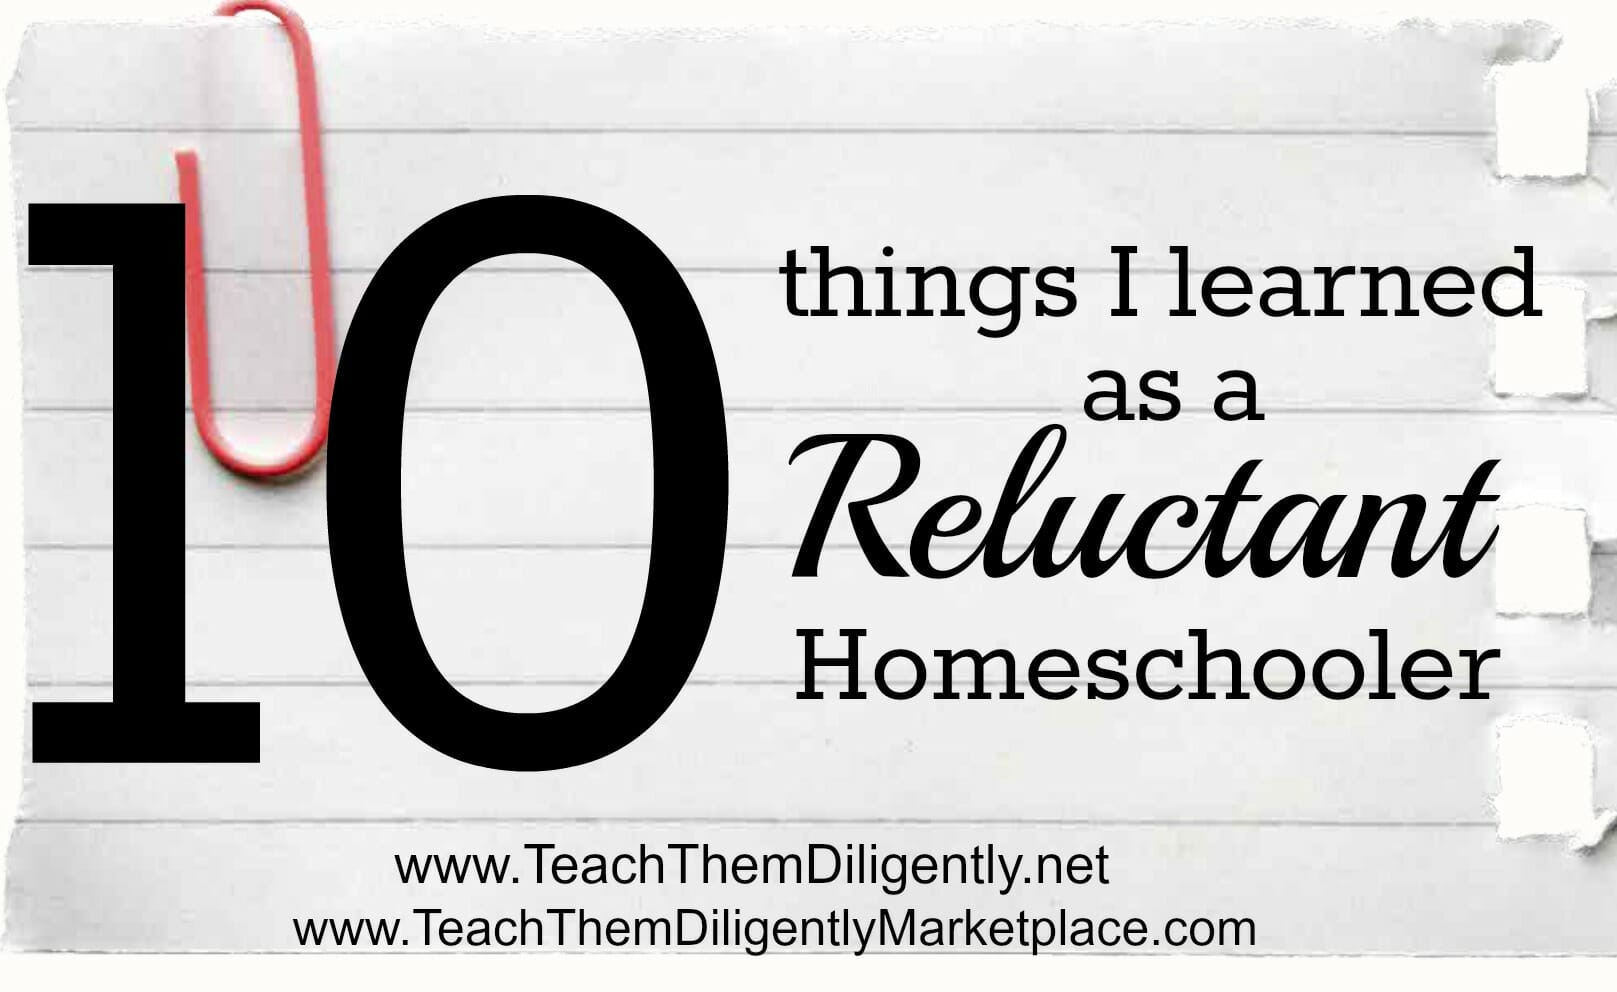 Reluctant Homeschooler at Teach Them Diligently